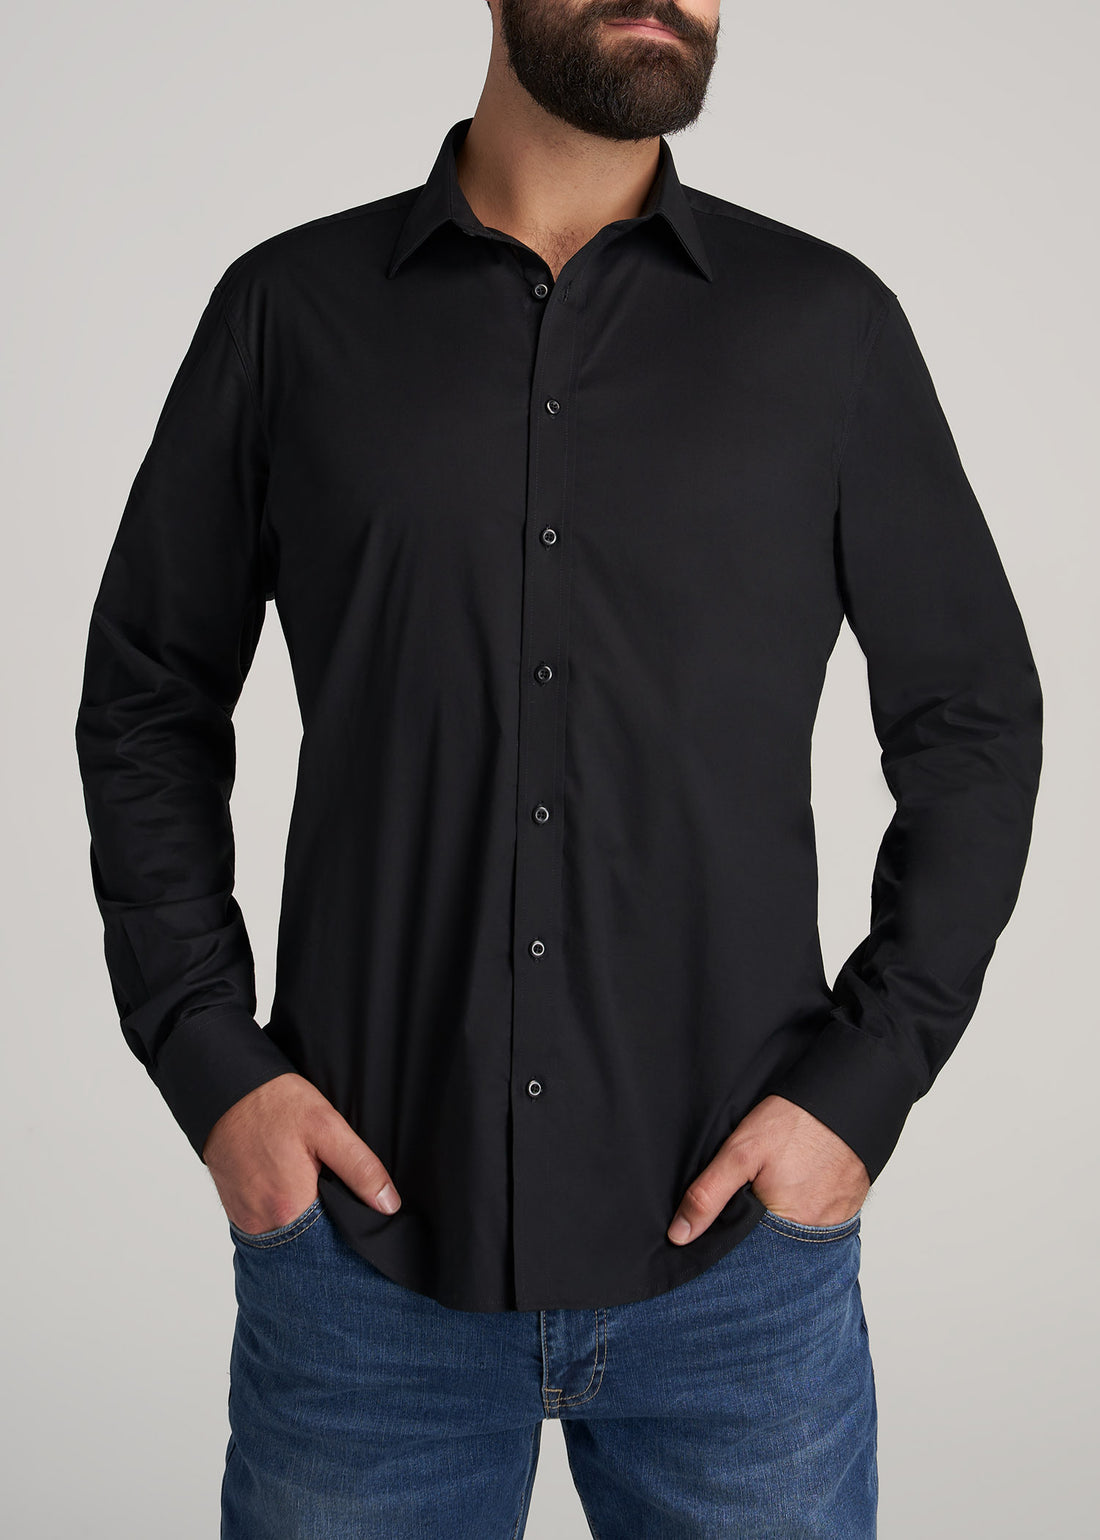 Tall man wearing American Tall's Oskar Easy Care Dress Shirt in the color Black.